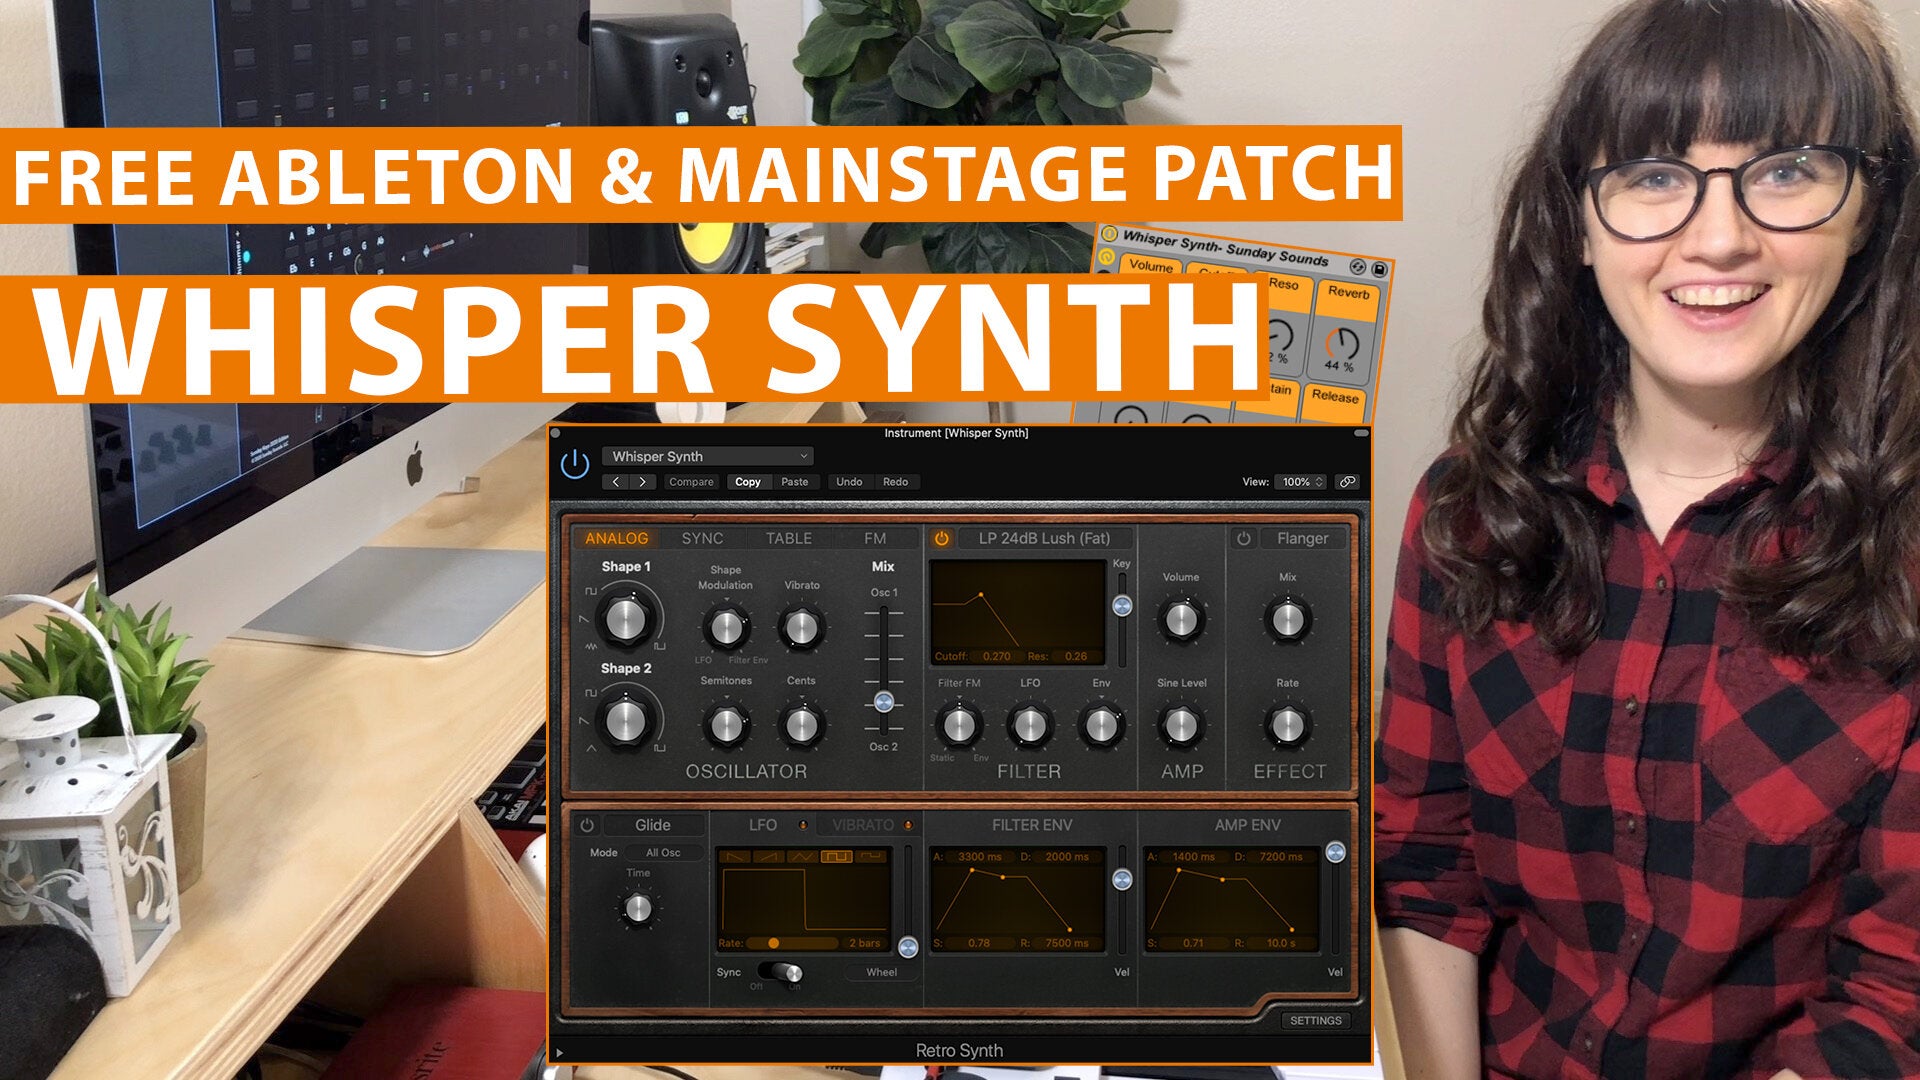 Free MainStage & Ableton Worship Patch! - Whisper Synth